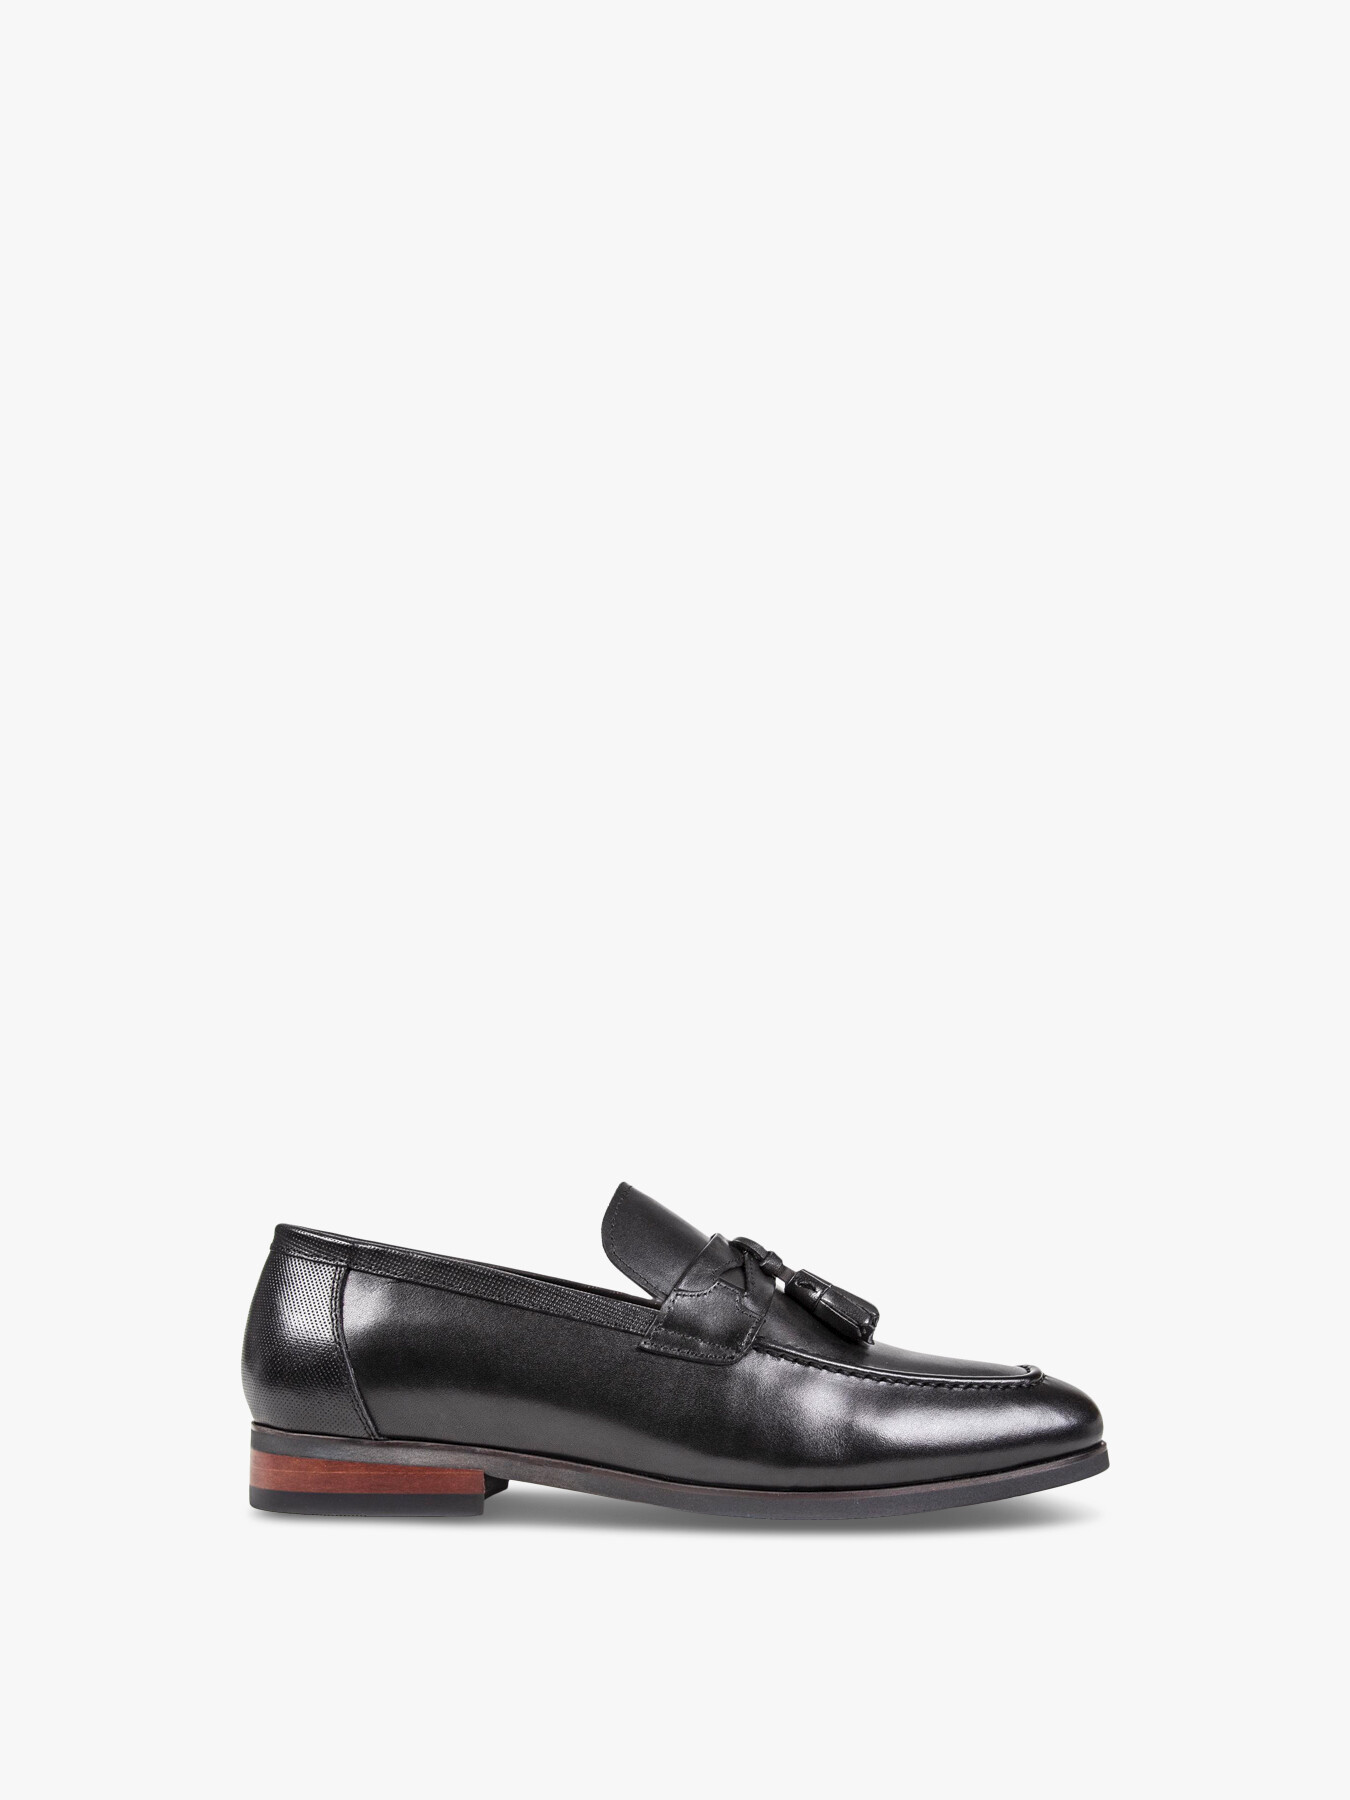 Sole Lassell Loafer Shoes Black